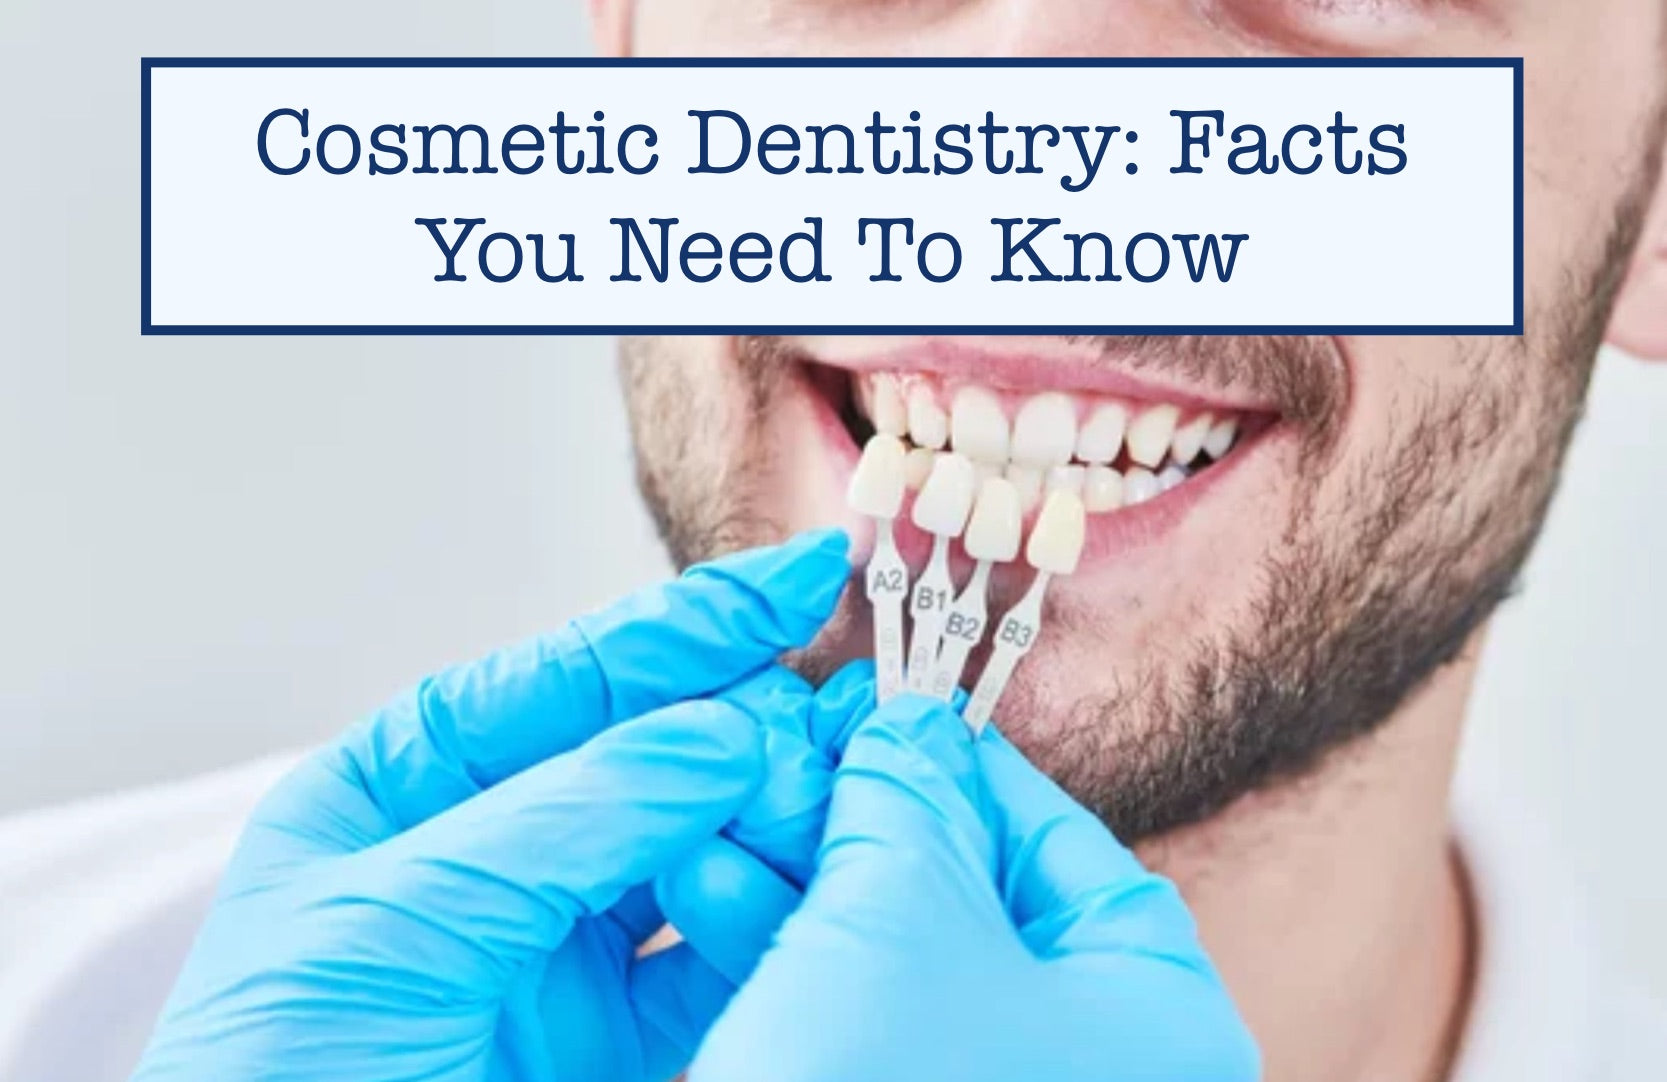 Cosmetic Dentistry: Facts You Need To Know